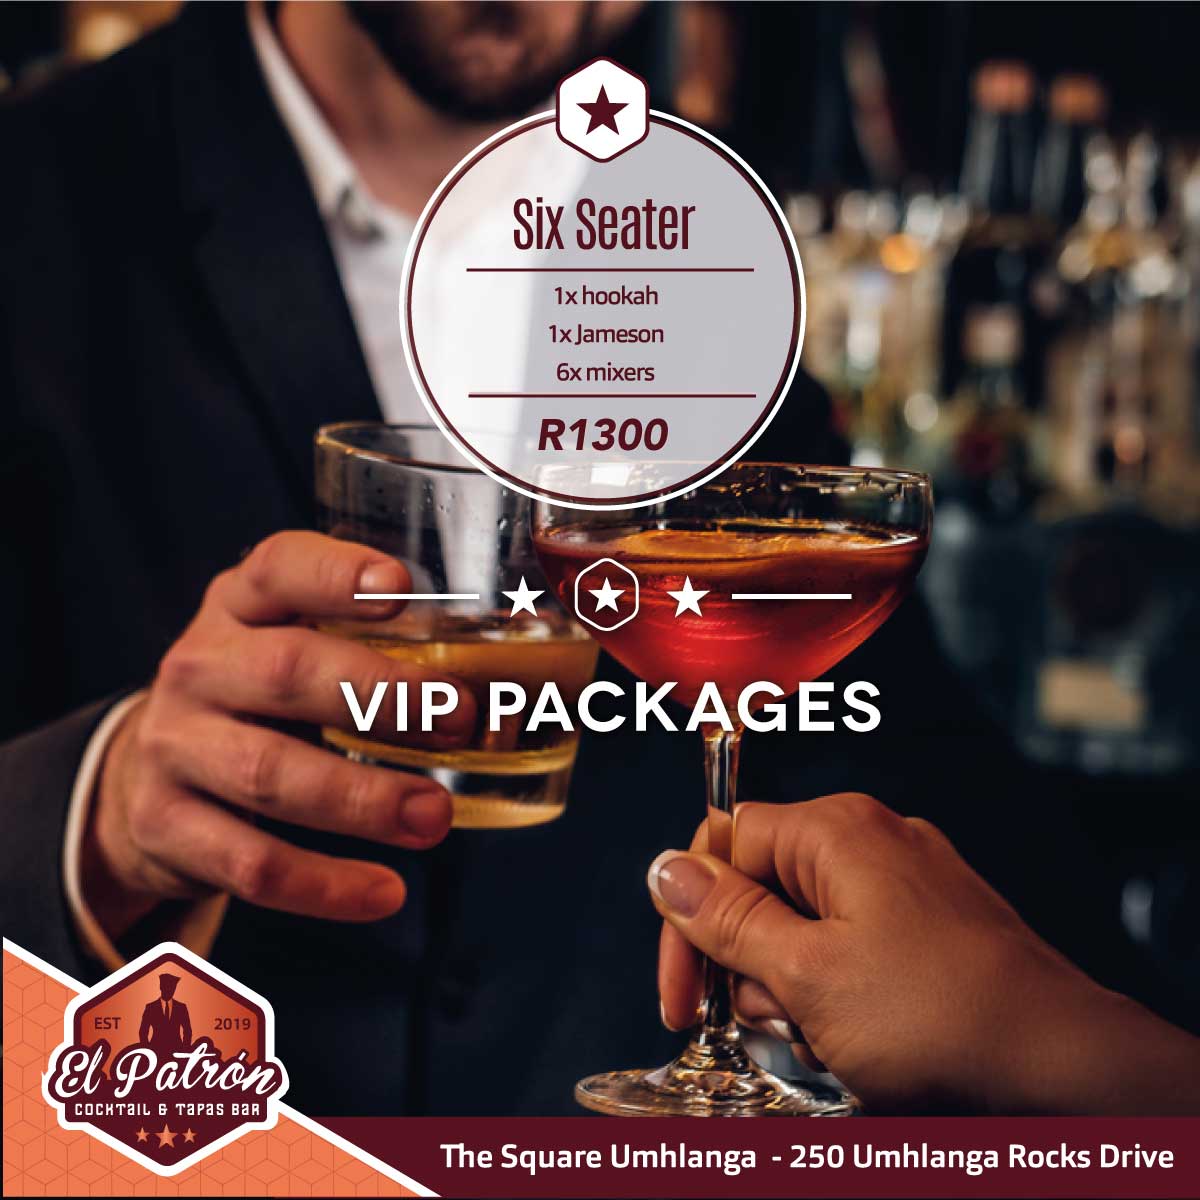 VIP PACKAGE 6 SEATER JAMESON SPECIAL